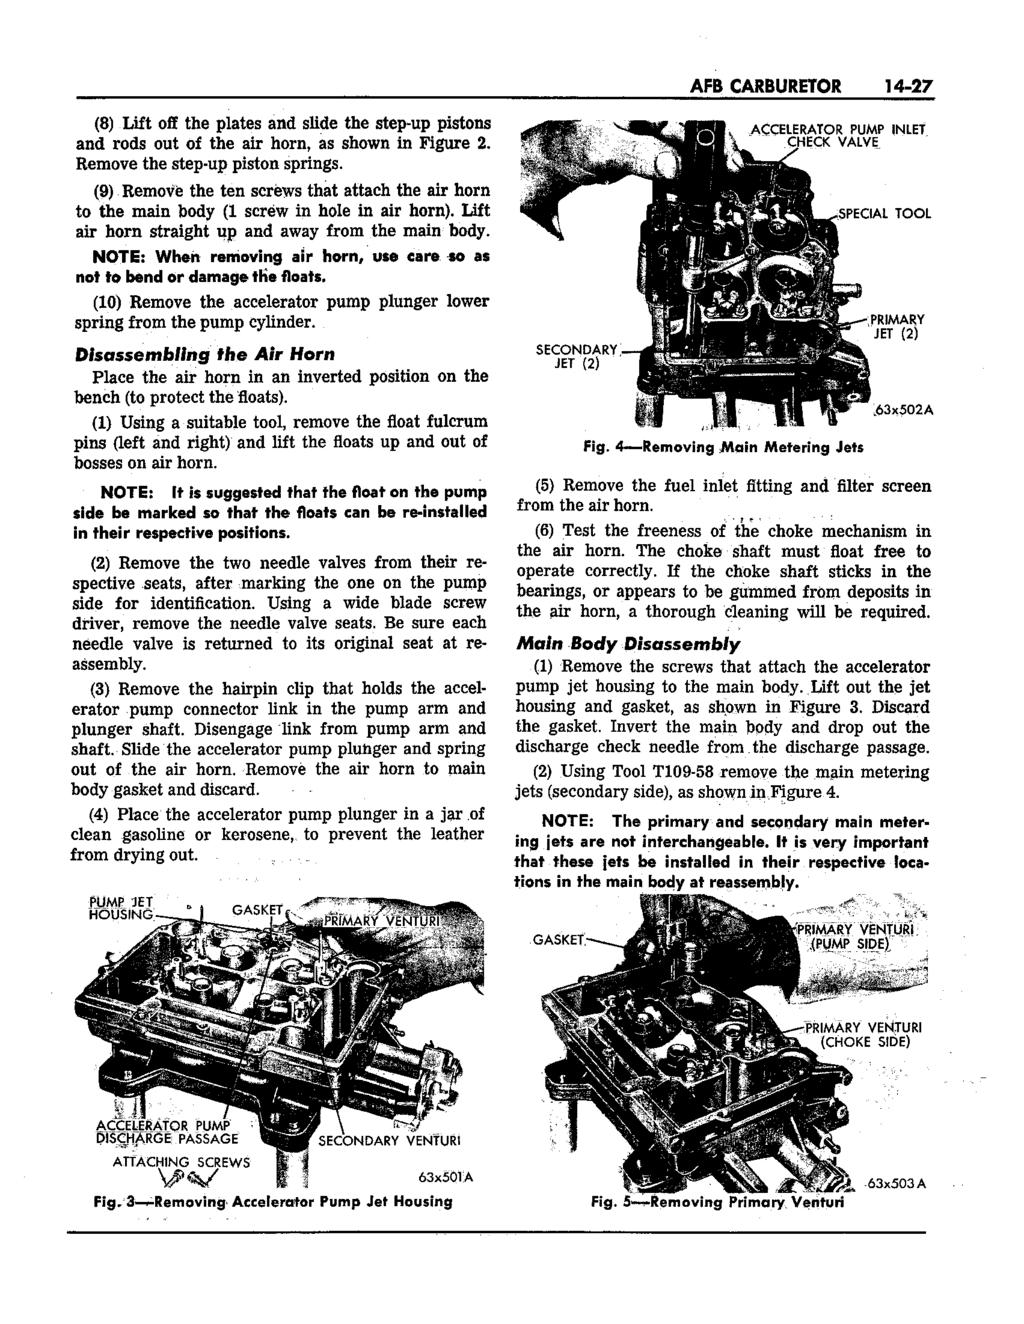 AFB CARBURETOR 14-27 (8) Lift off the plates and slide the step-up pistons and rods out of the air horn, as shown in Figure 2. Remove the step-up piston springs.